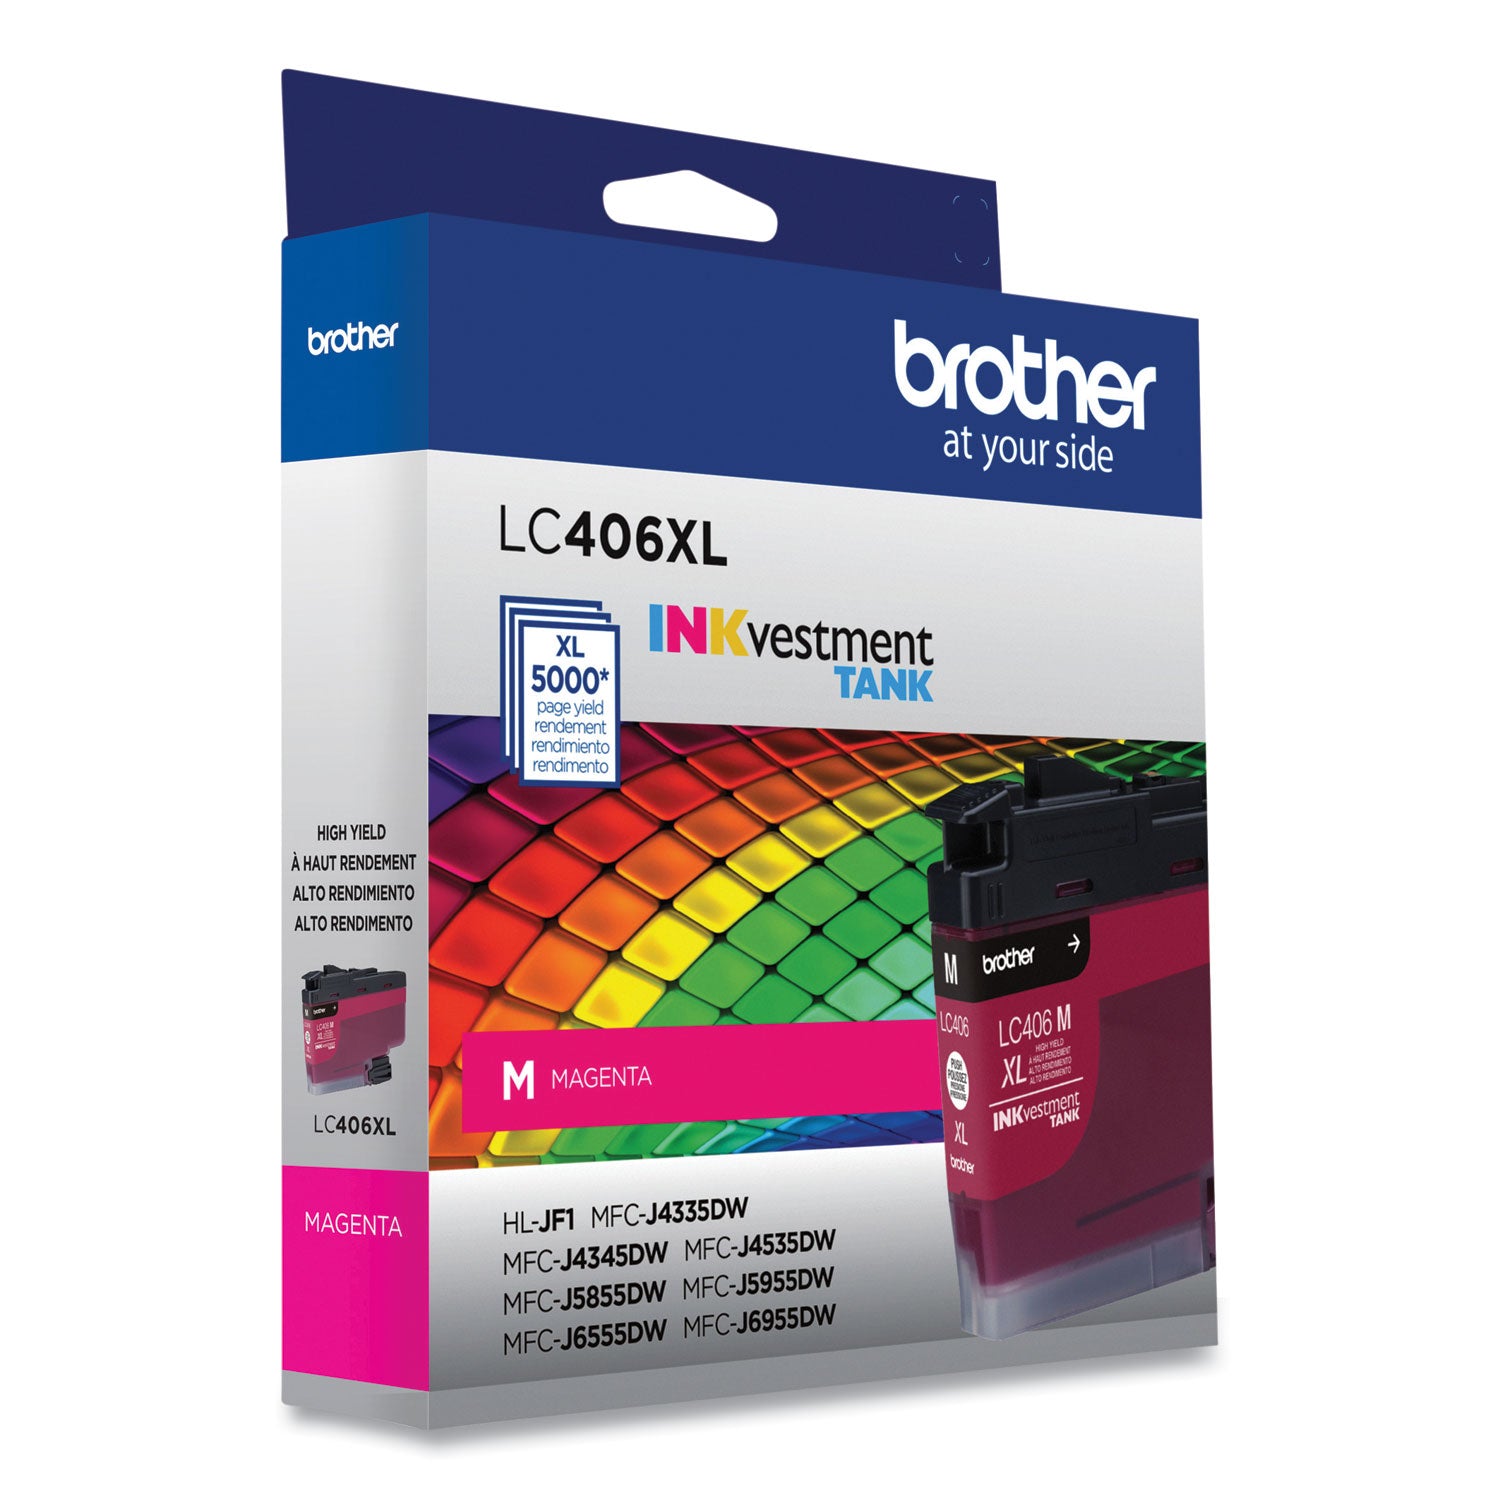 lc406xlms-inkvestment-high-yield-ink-5000-page-yield-magenta_brtlc406xlms - 3